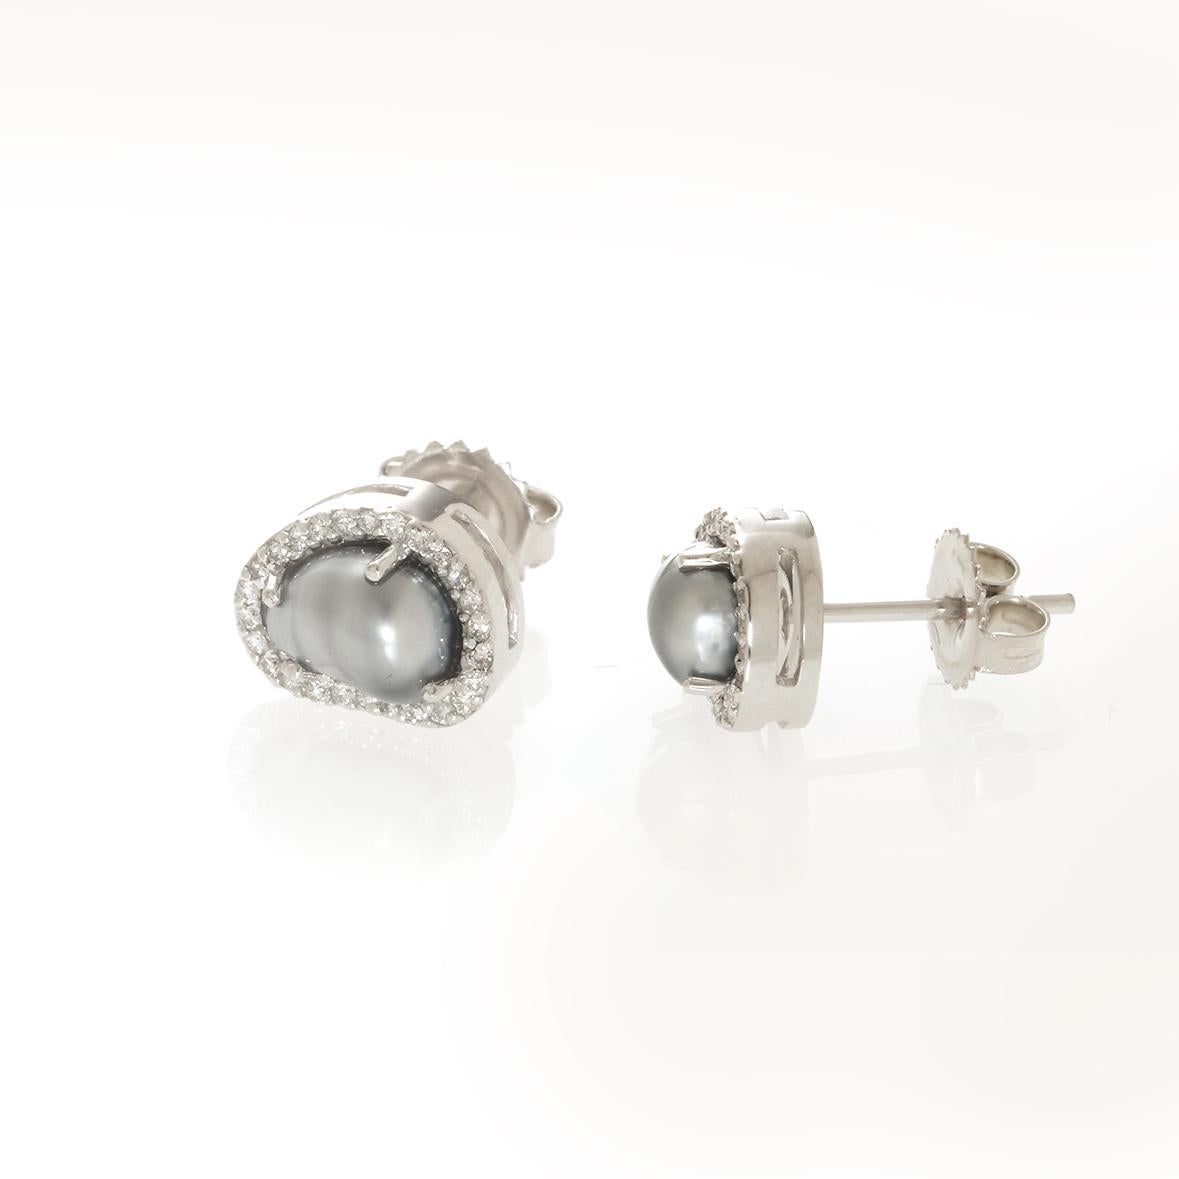 Tahitian pearl and diamond earrings in 14 k white gold.

11 mm x 8 mm